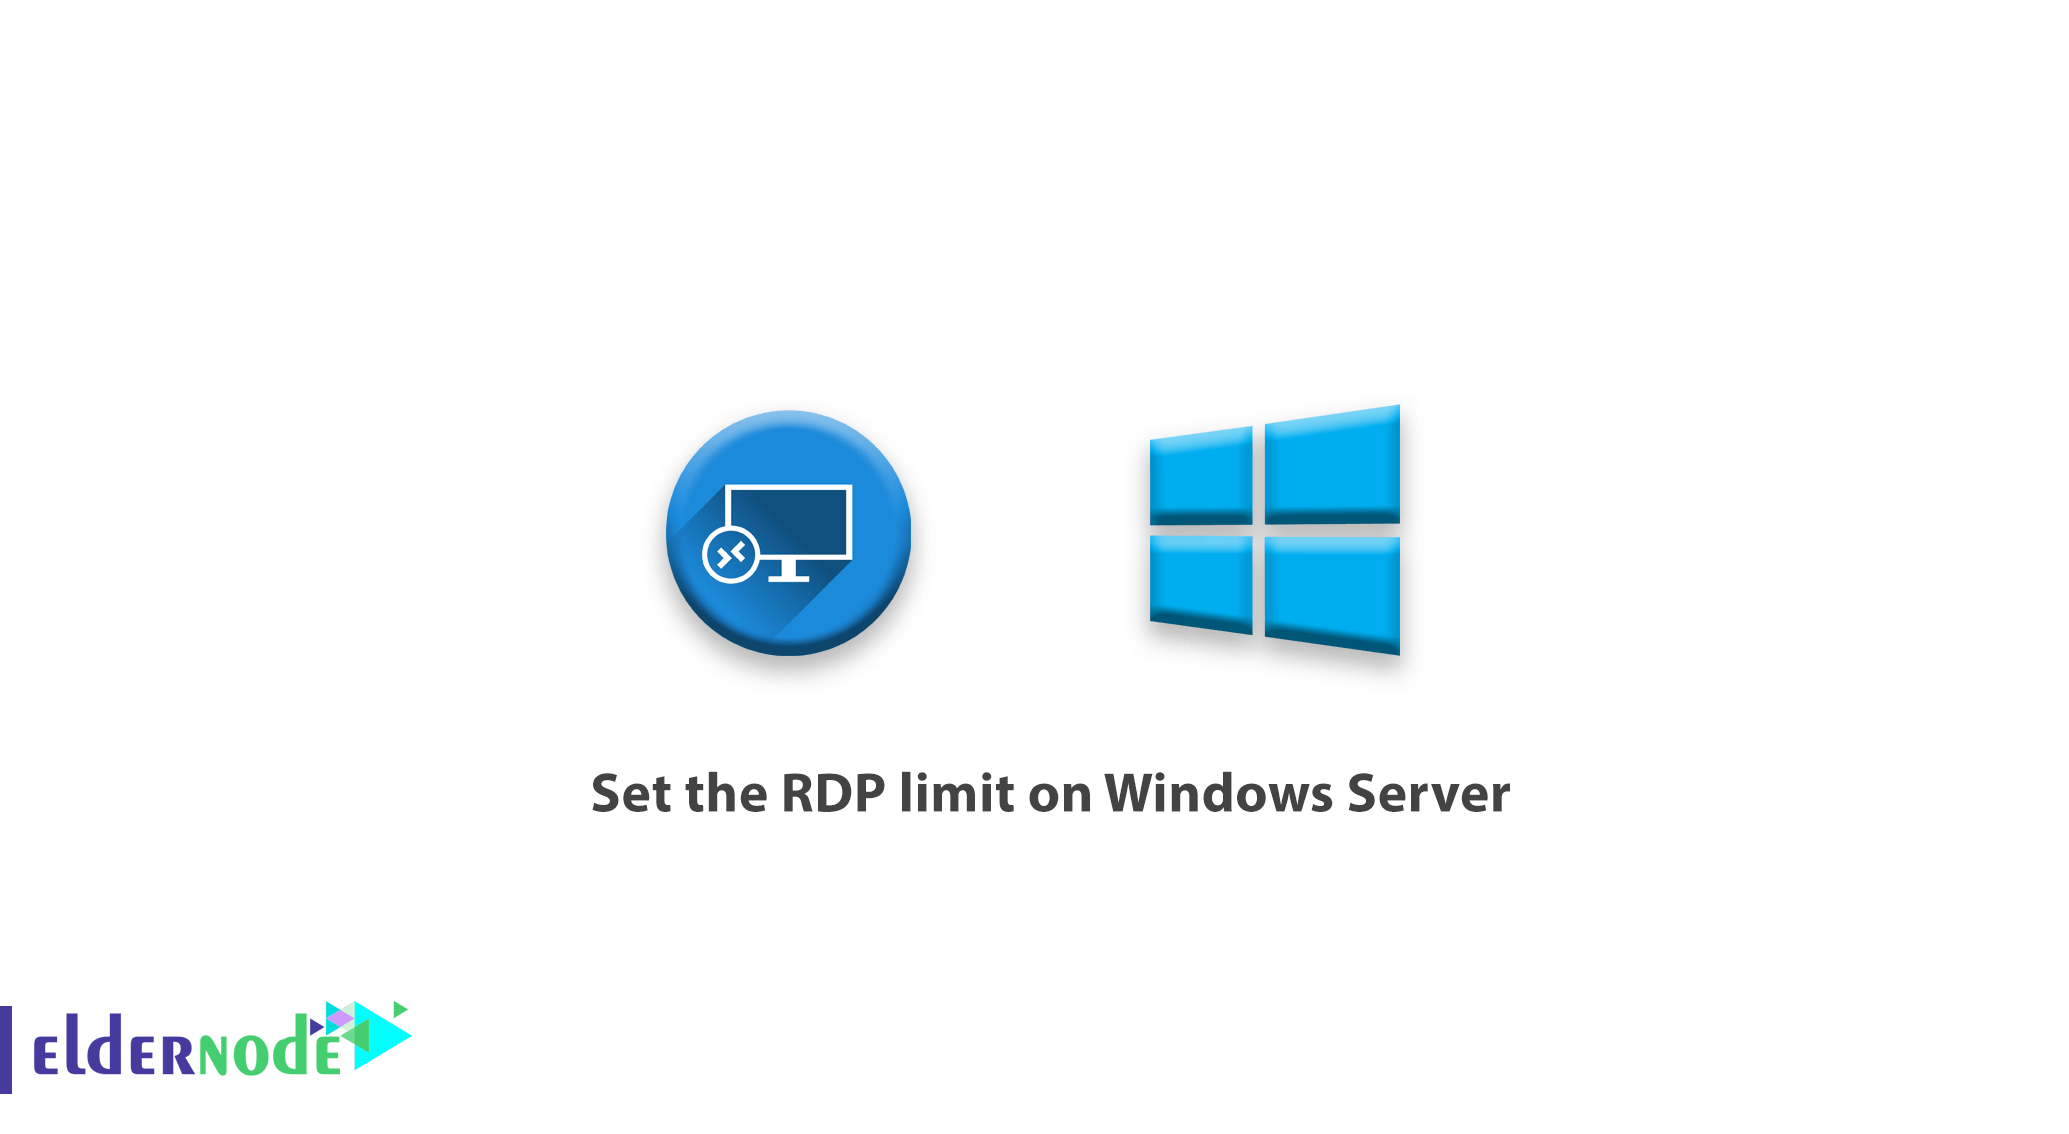 How to Set the RDP limit on Windows Server